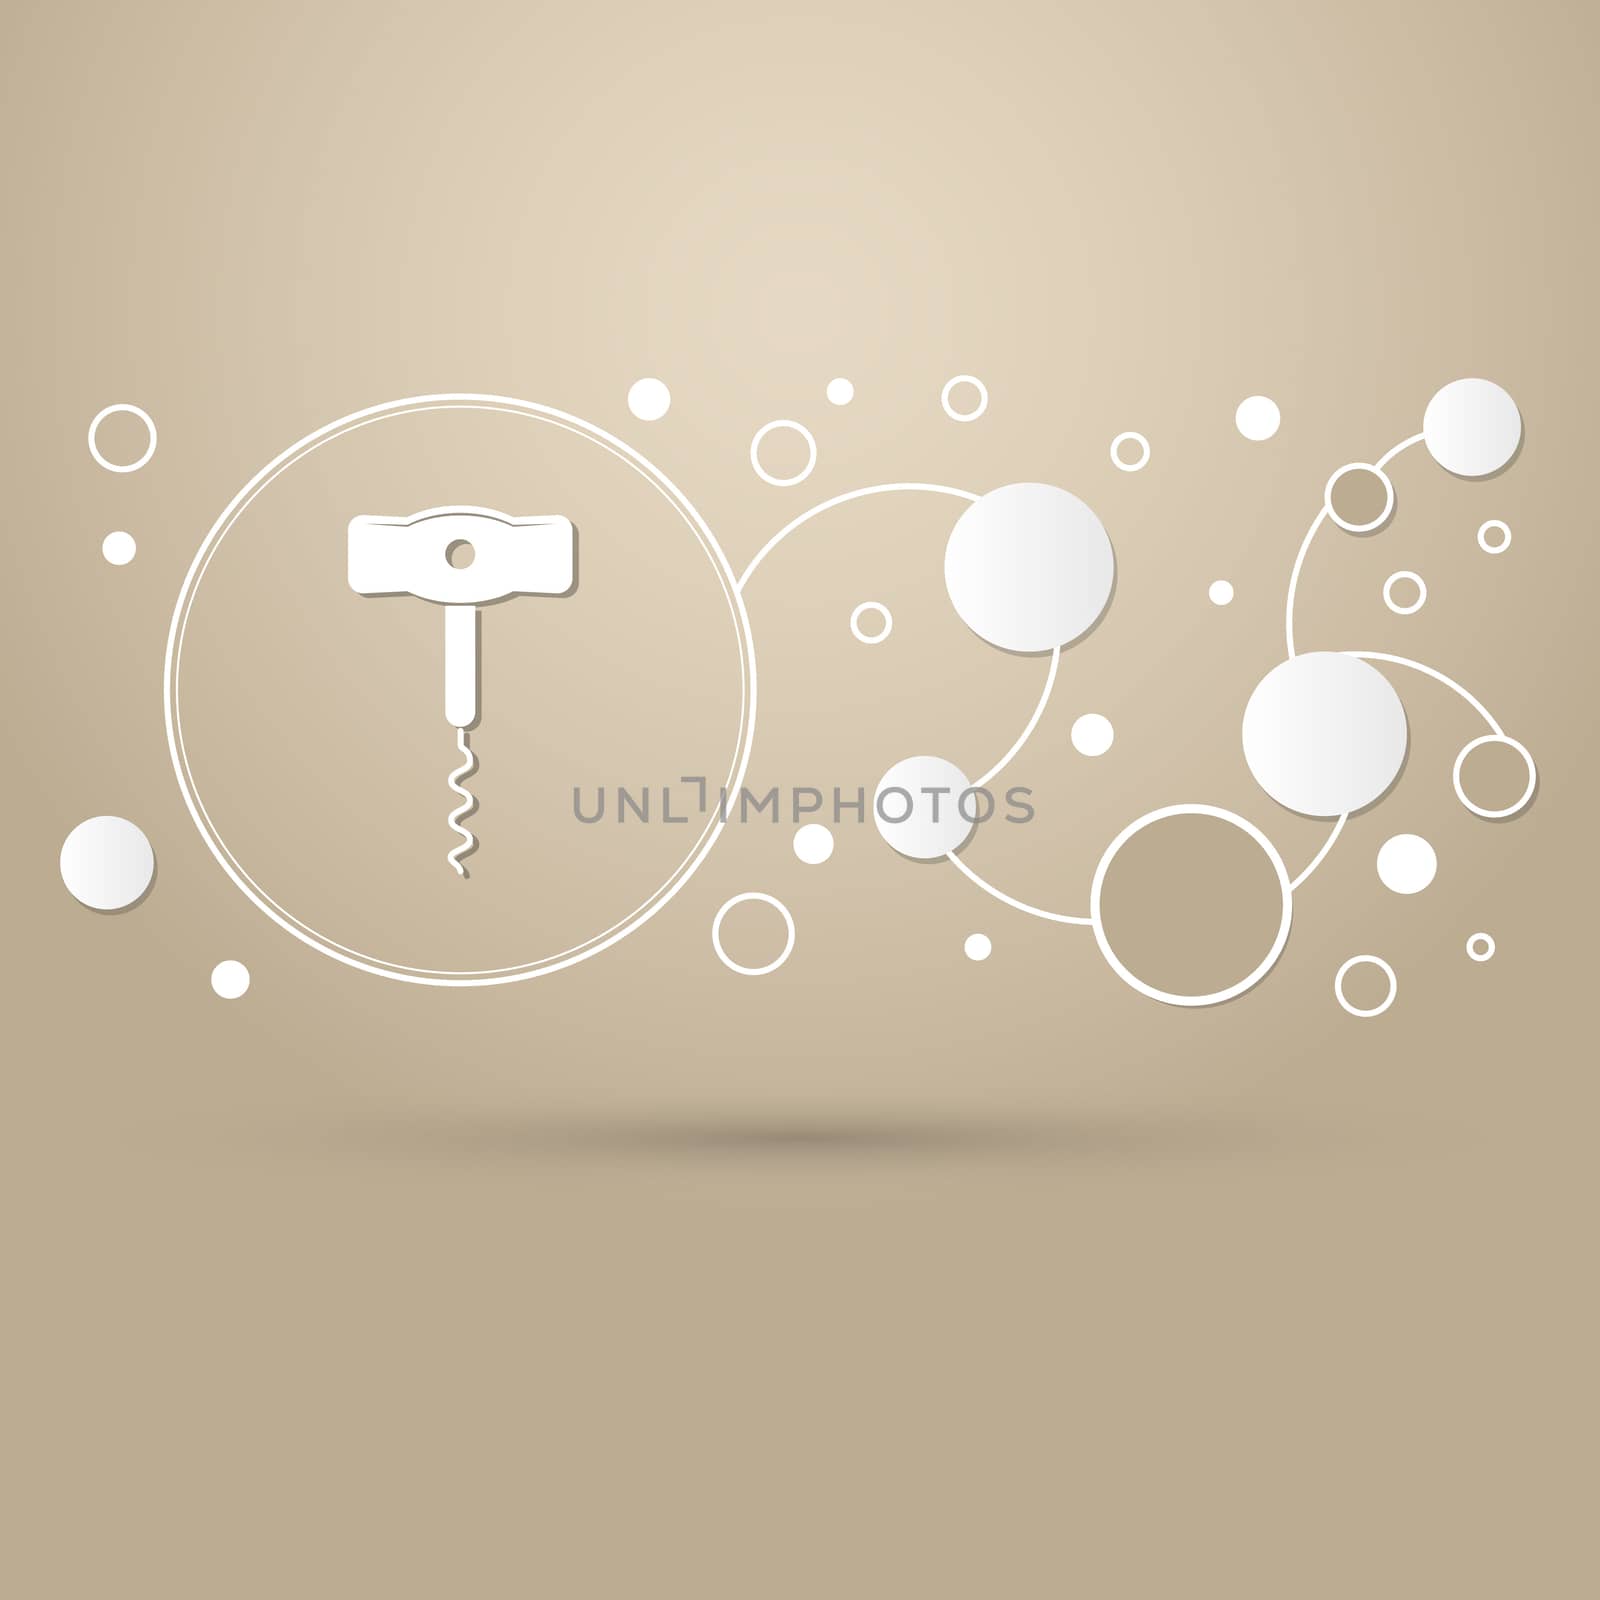 corkscrew icon on a brown background with elegant style and modern design infographic. illustration